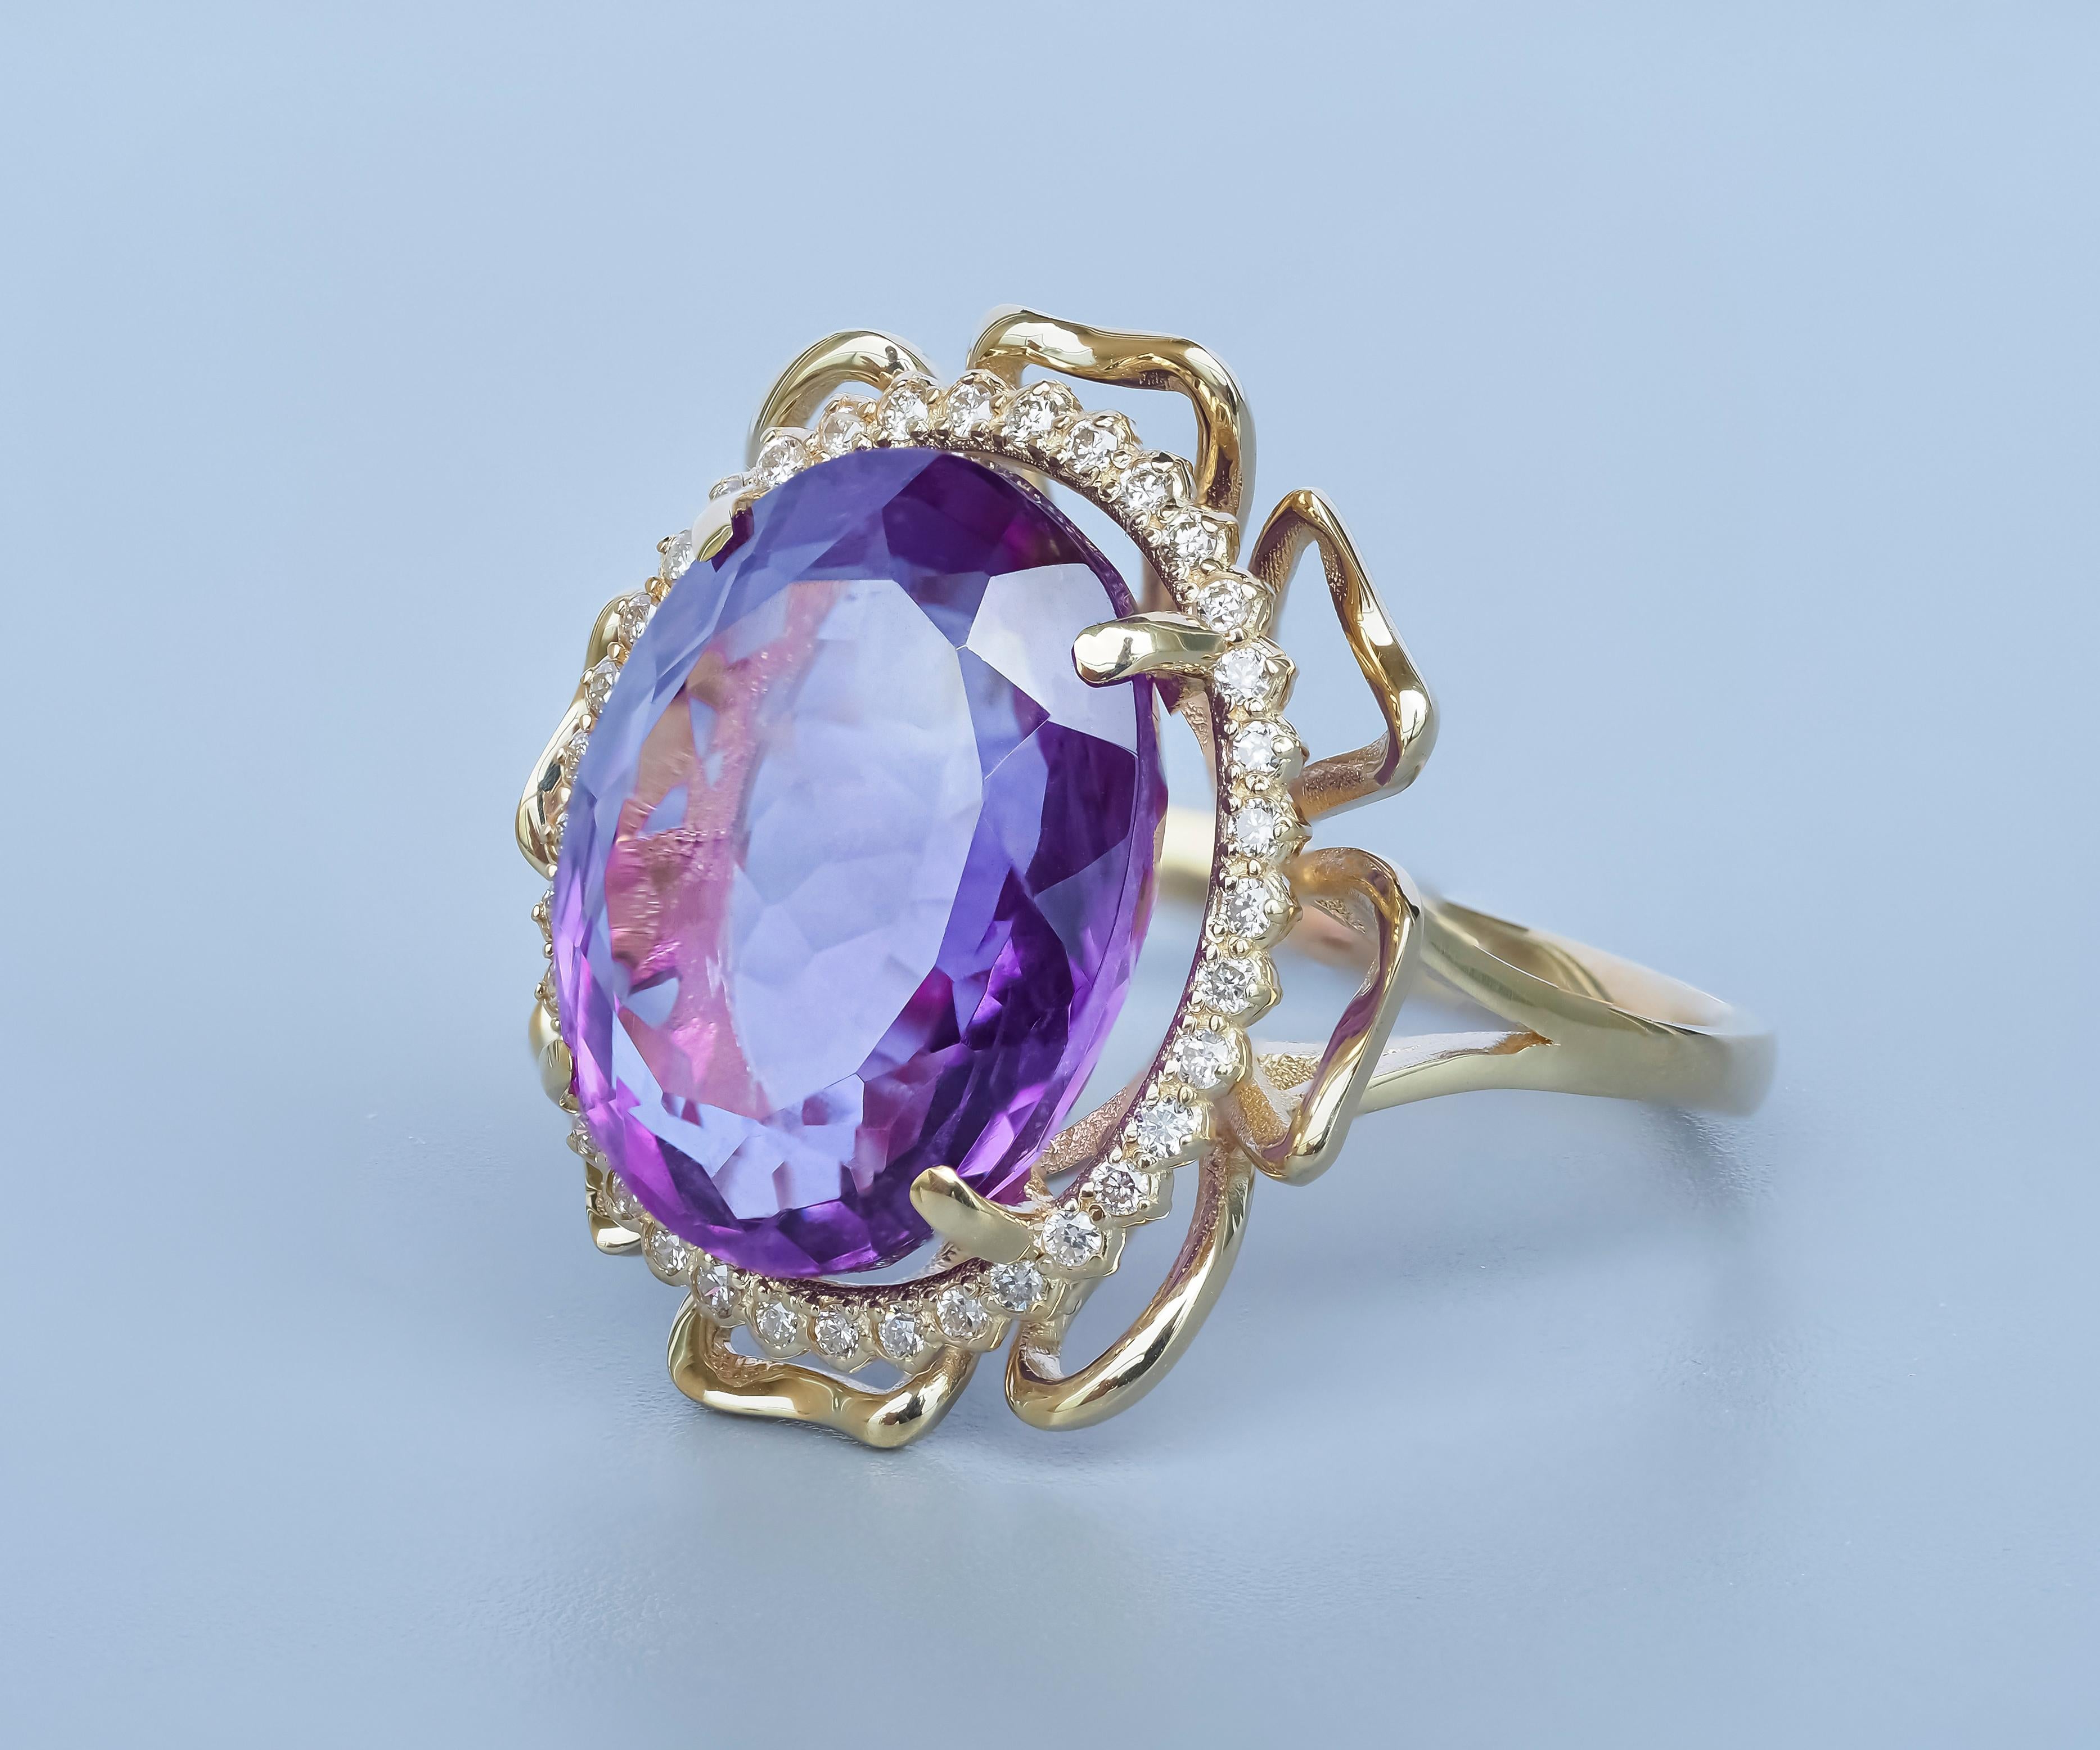 14k gold Amethyst and diamonds ring. 
Flower ring. Purple gemstone Ring. Cocktail amethyst ring. February birthstone ring.  

Metal: 14 gold
Weight: 4.30 g. depends from size

Set with amethsyst, color violet
Oval cut, apx 16 ct.  
Clarity: